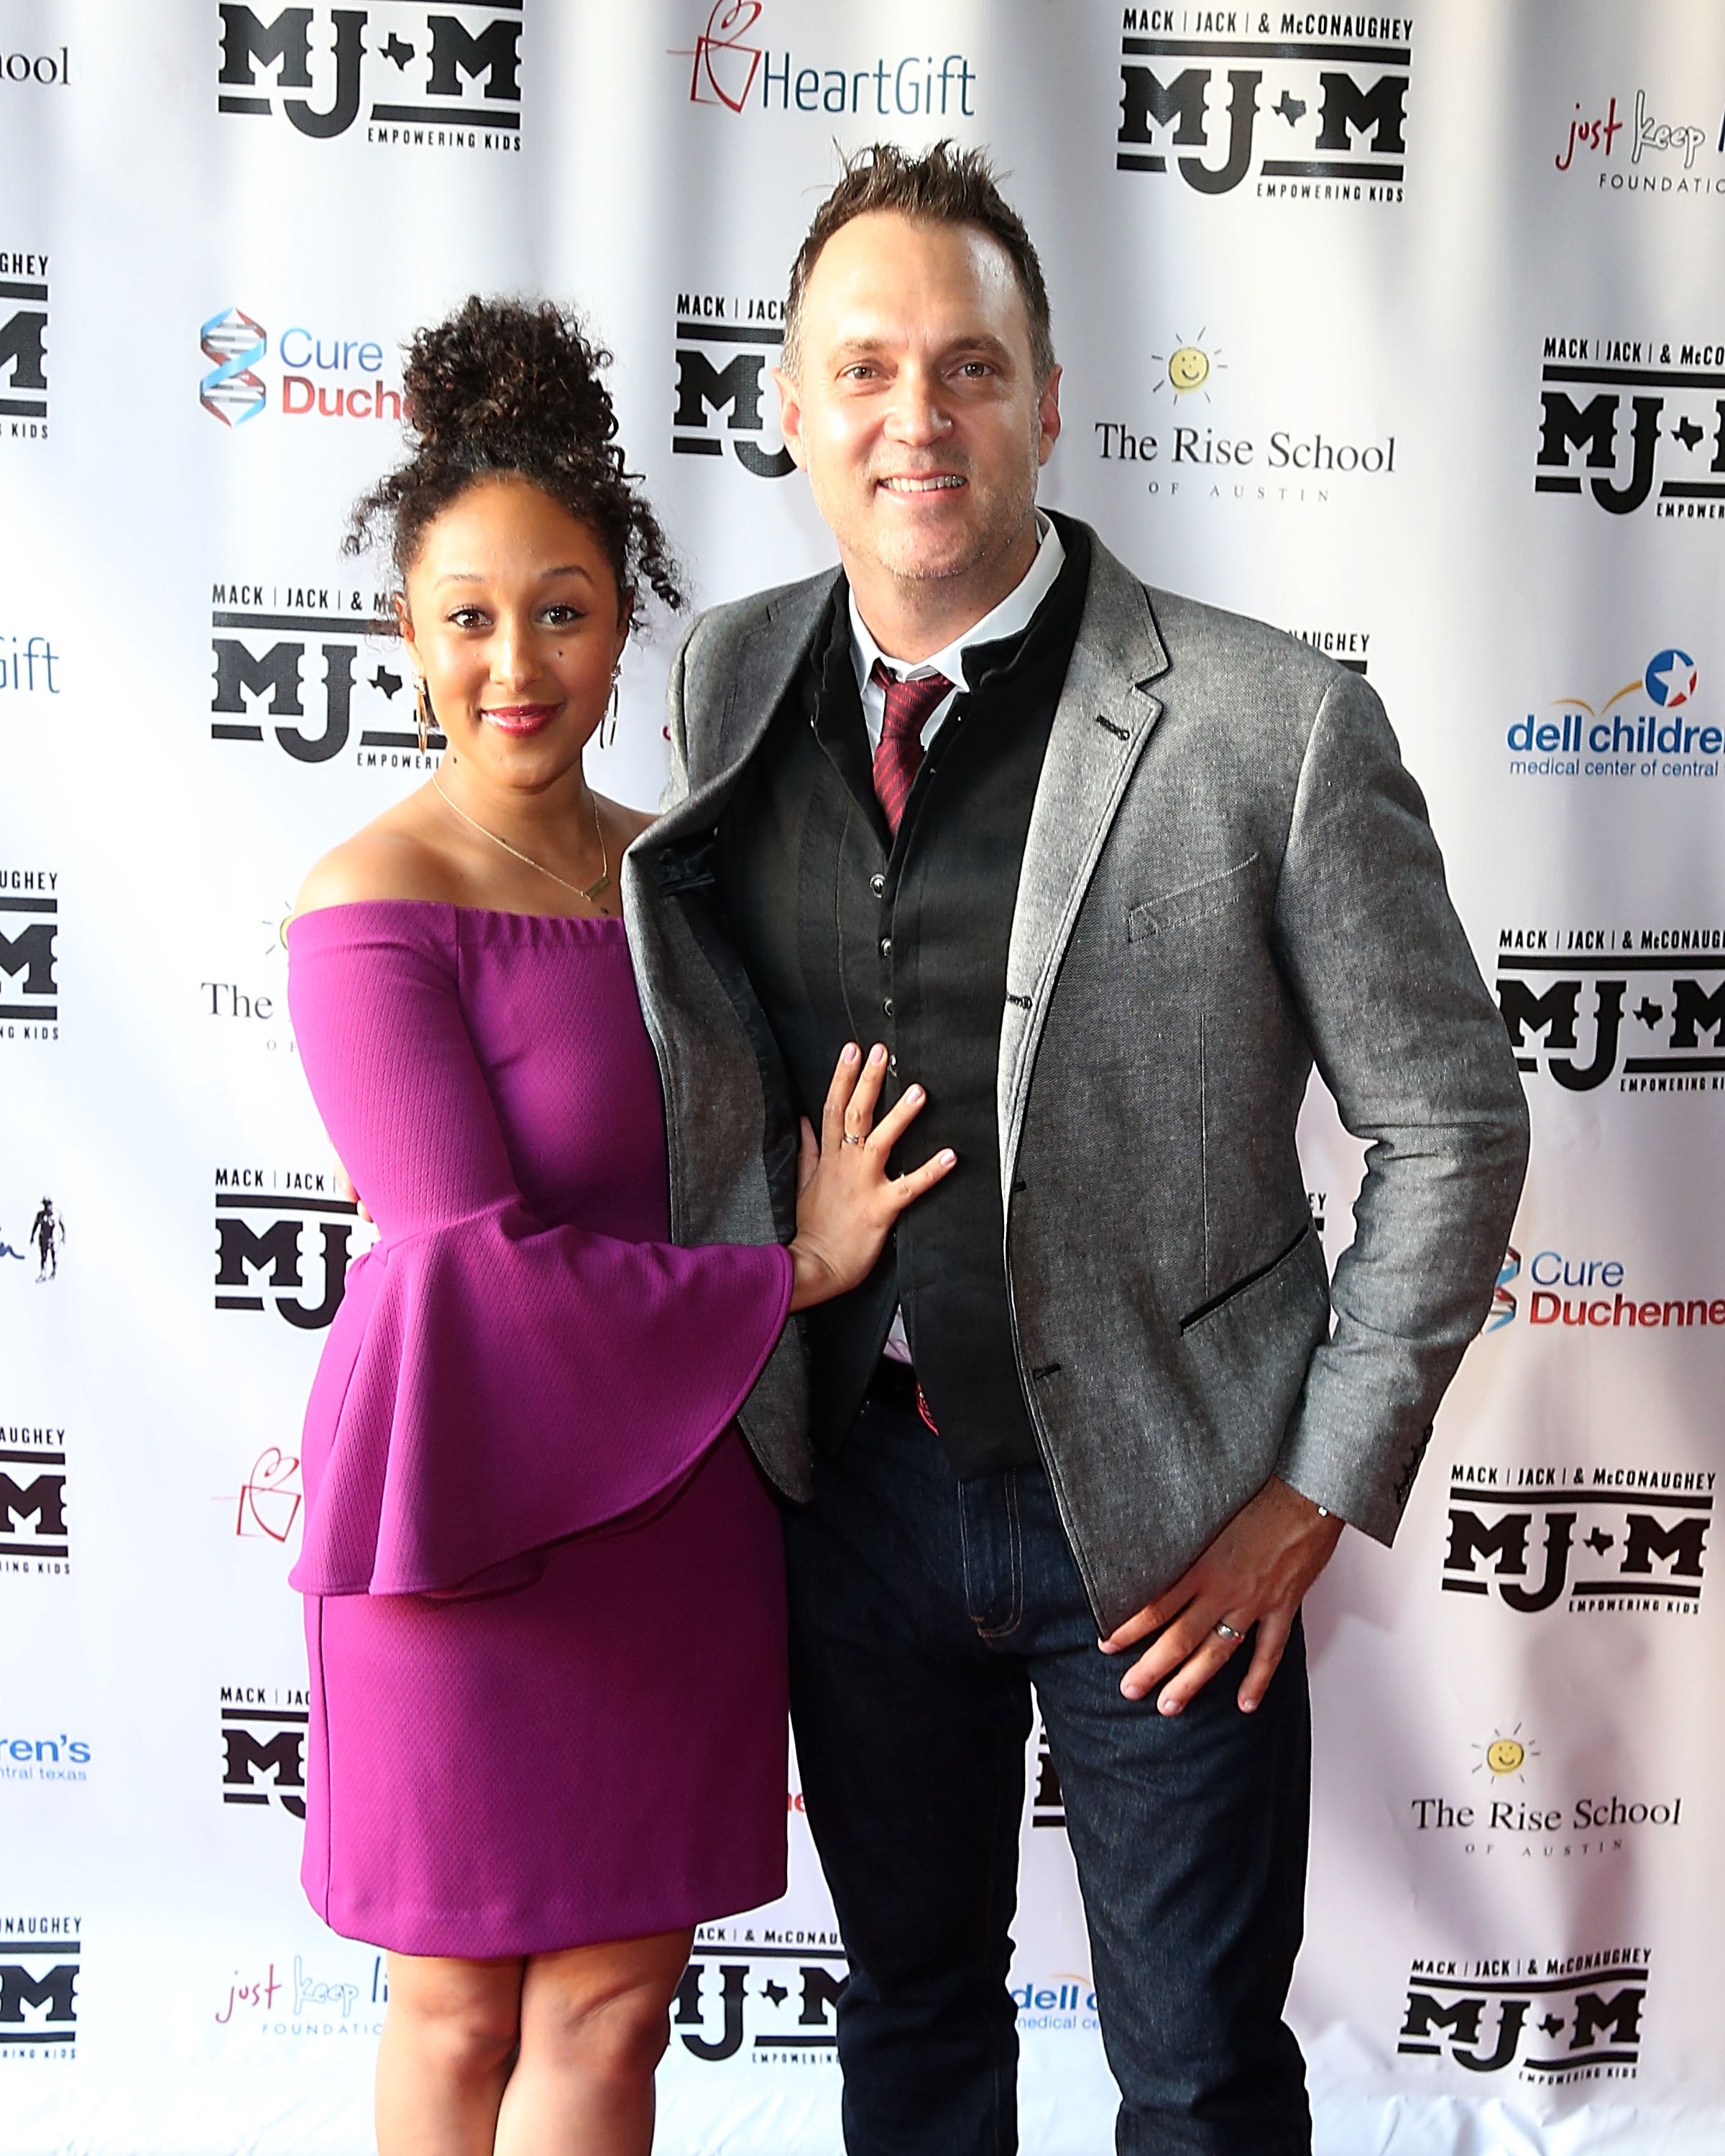 Tamera Mowry-Housley and Adam Housley at the Mack, Jack & McConaughey charity gala on April 12, 2018 in Texas. |Photo: Getty Images